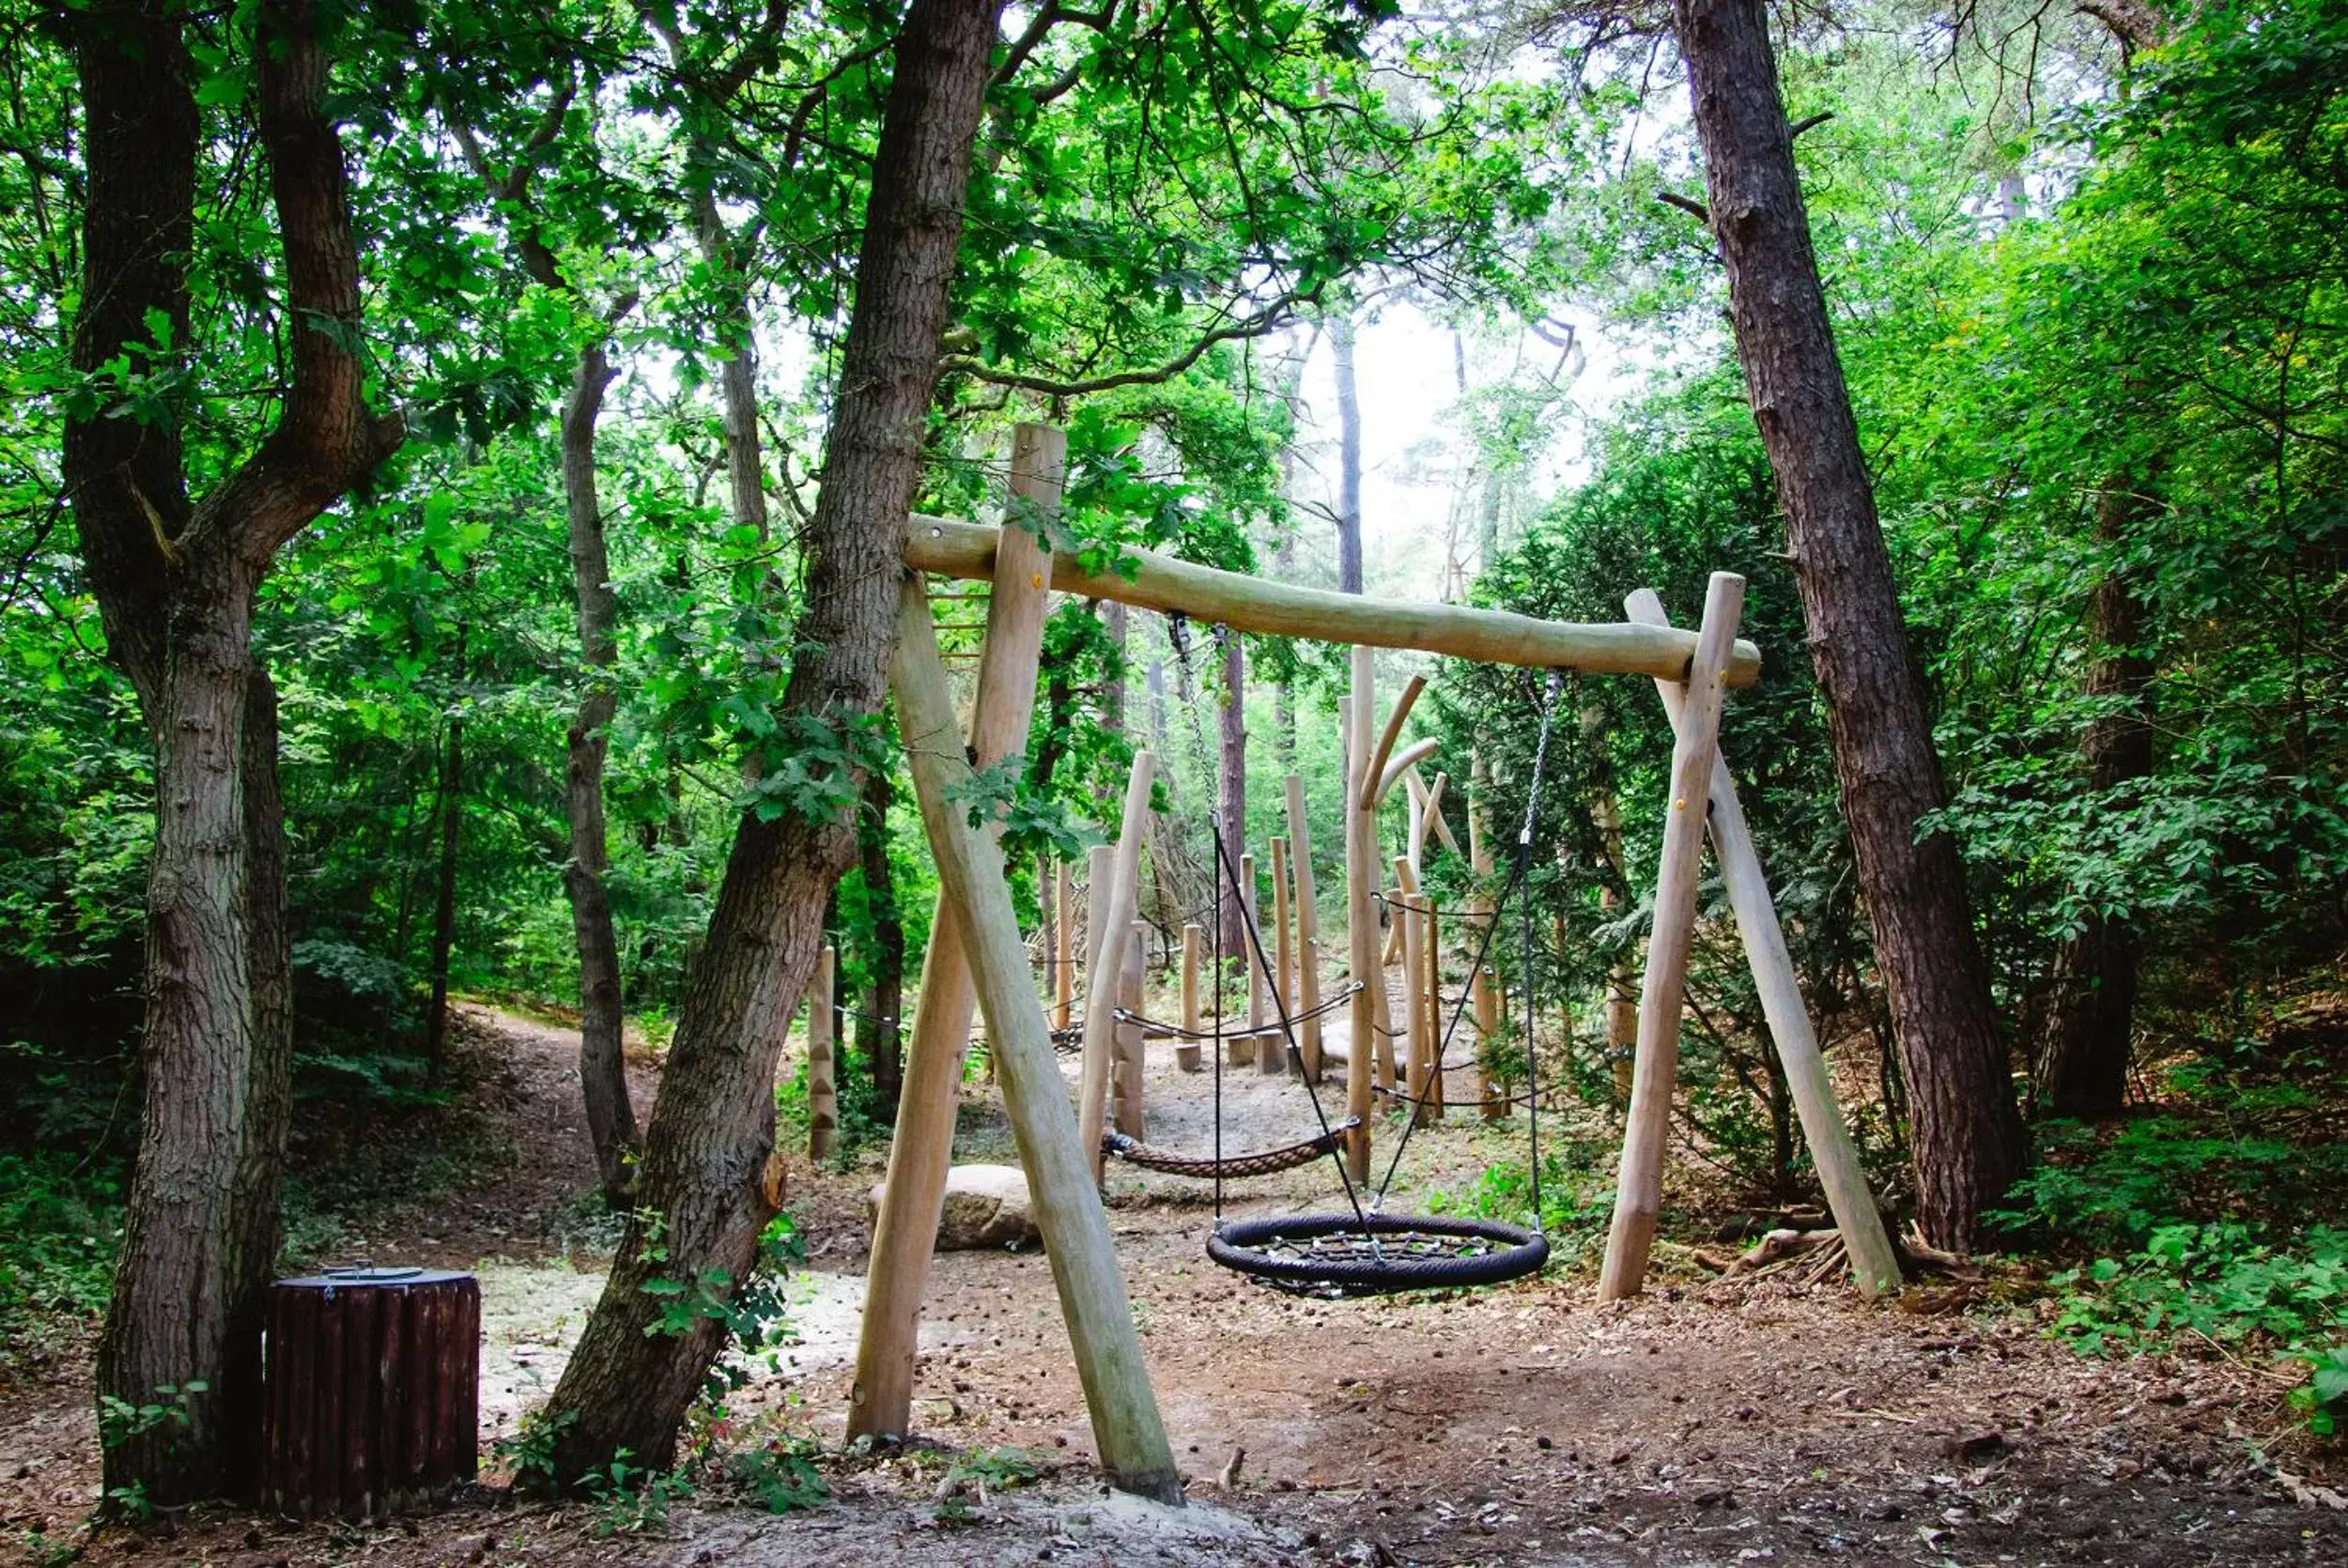 Children play ground, Children's Play Area in blooming